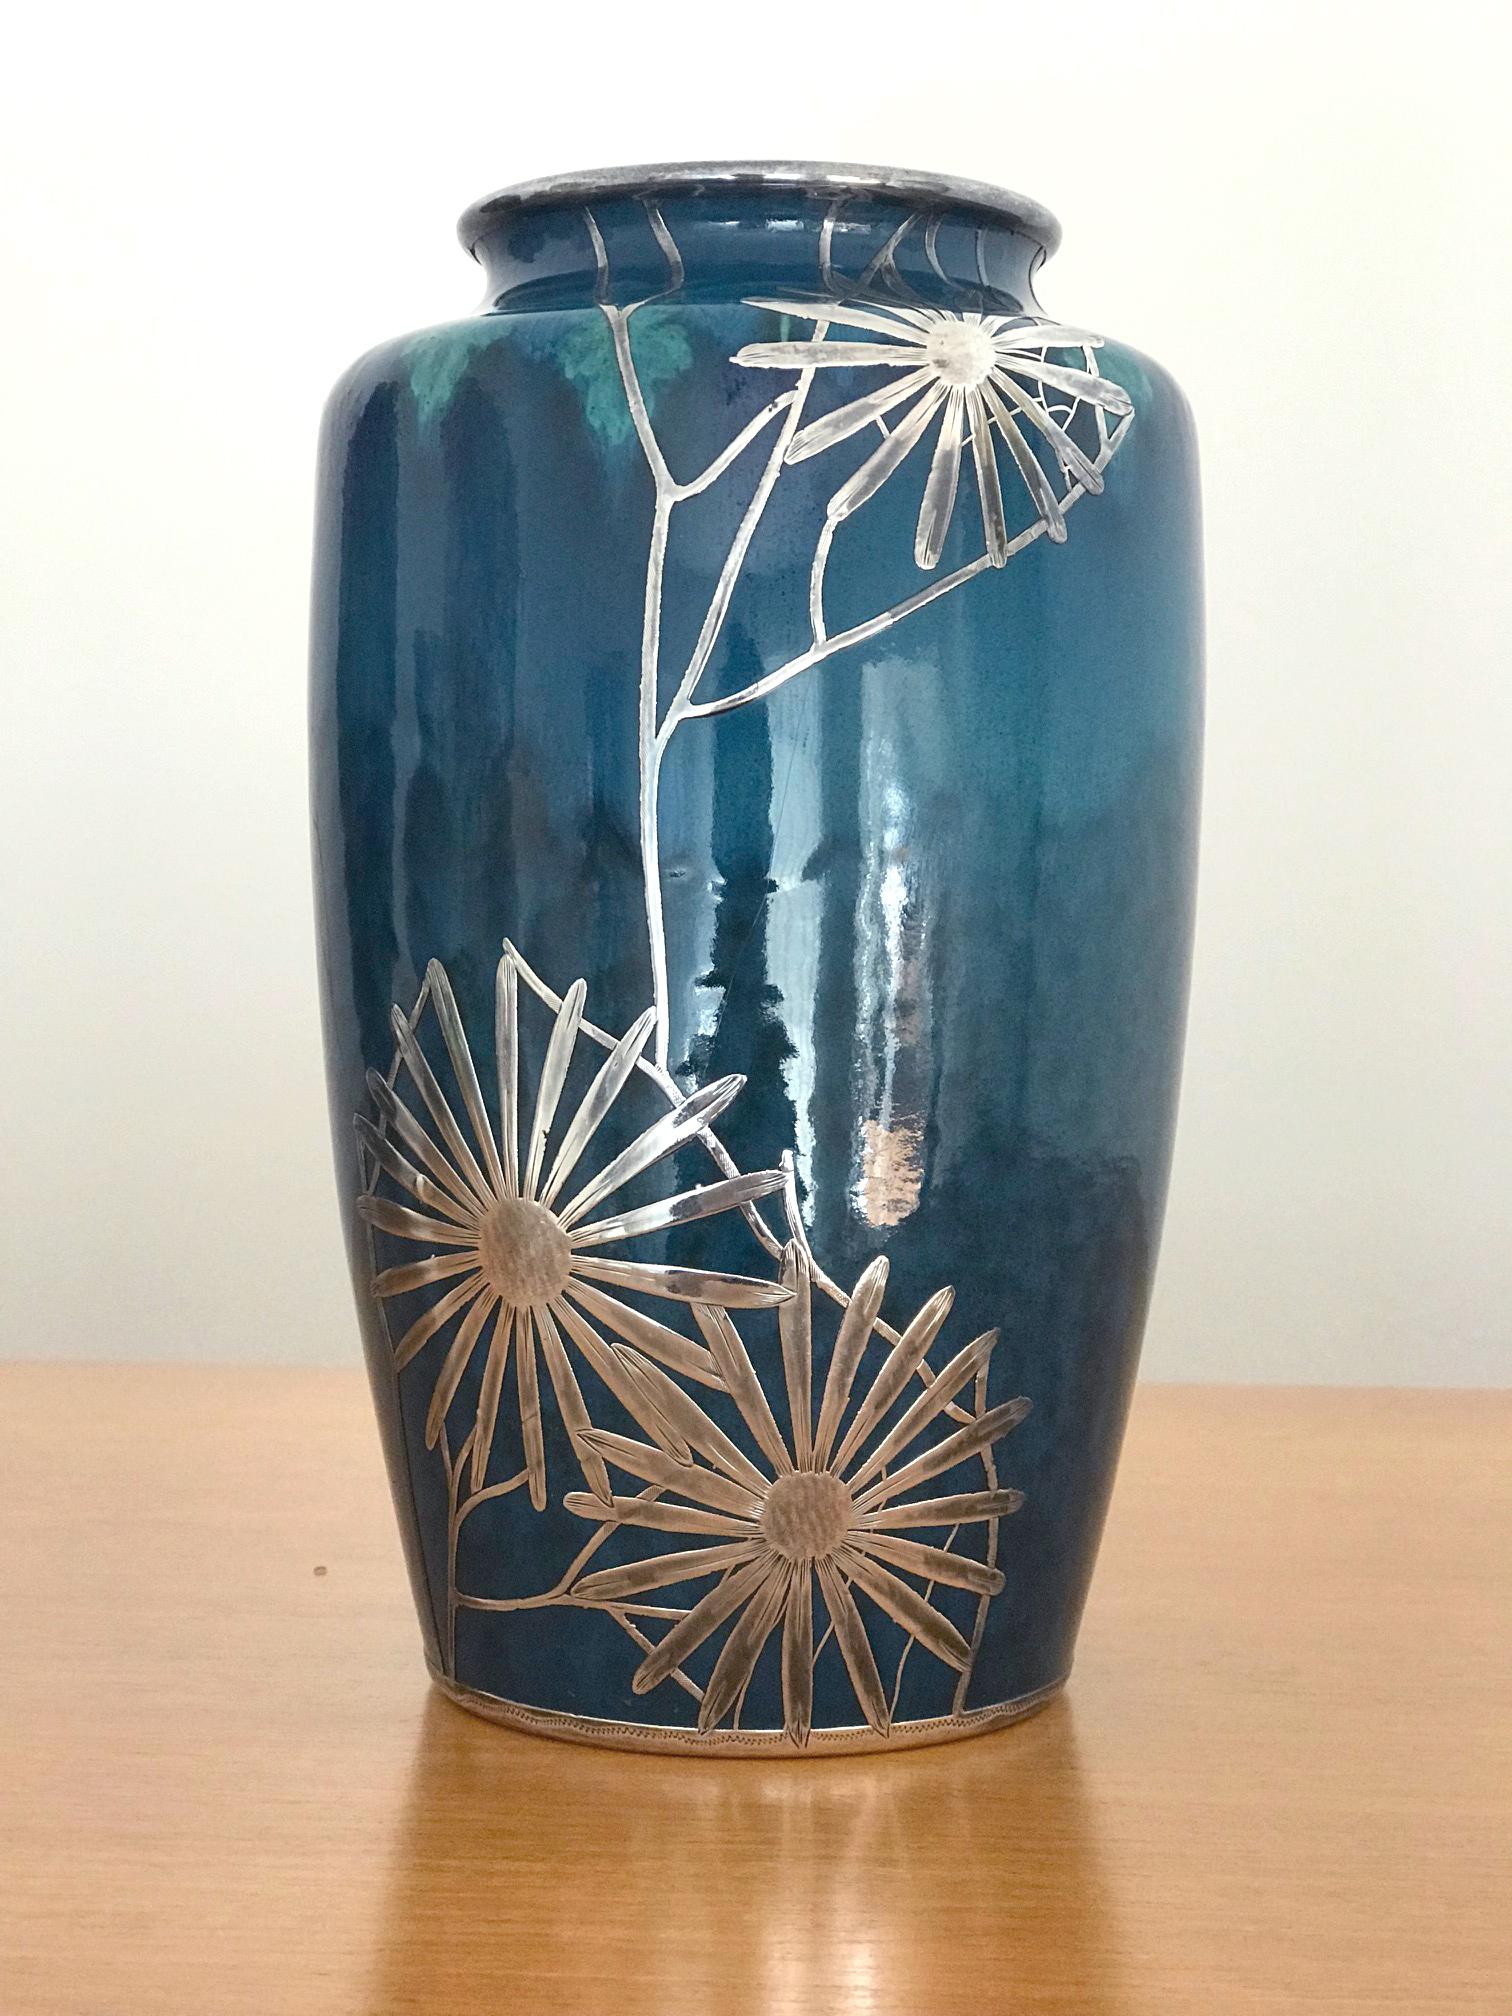 On offer here is a porcelain vase of blue glaze with silver overlay circa 1910s in the Art Nouveau style. The peacock blue vase is decorated with a subtle turquoise leaf wreath on the shoulder and marked underneath. The maker is not identified